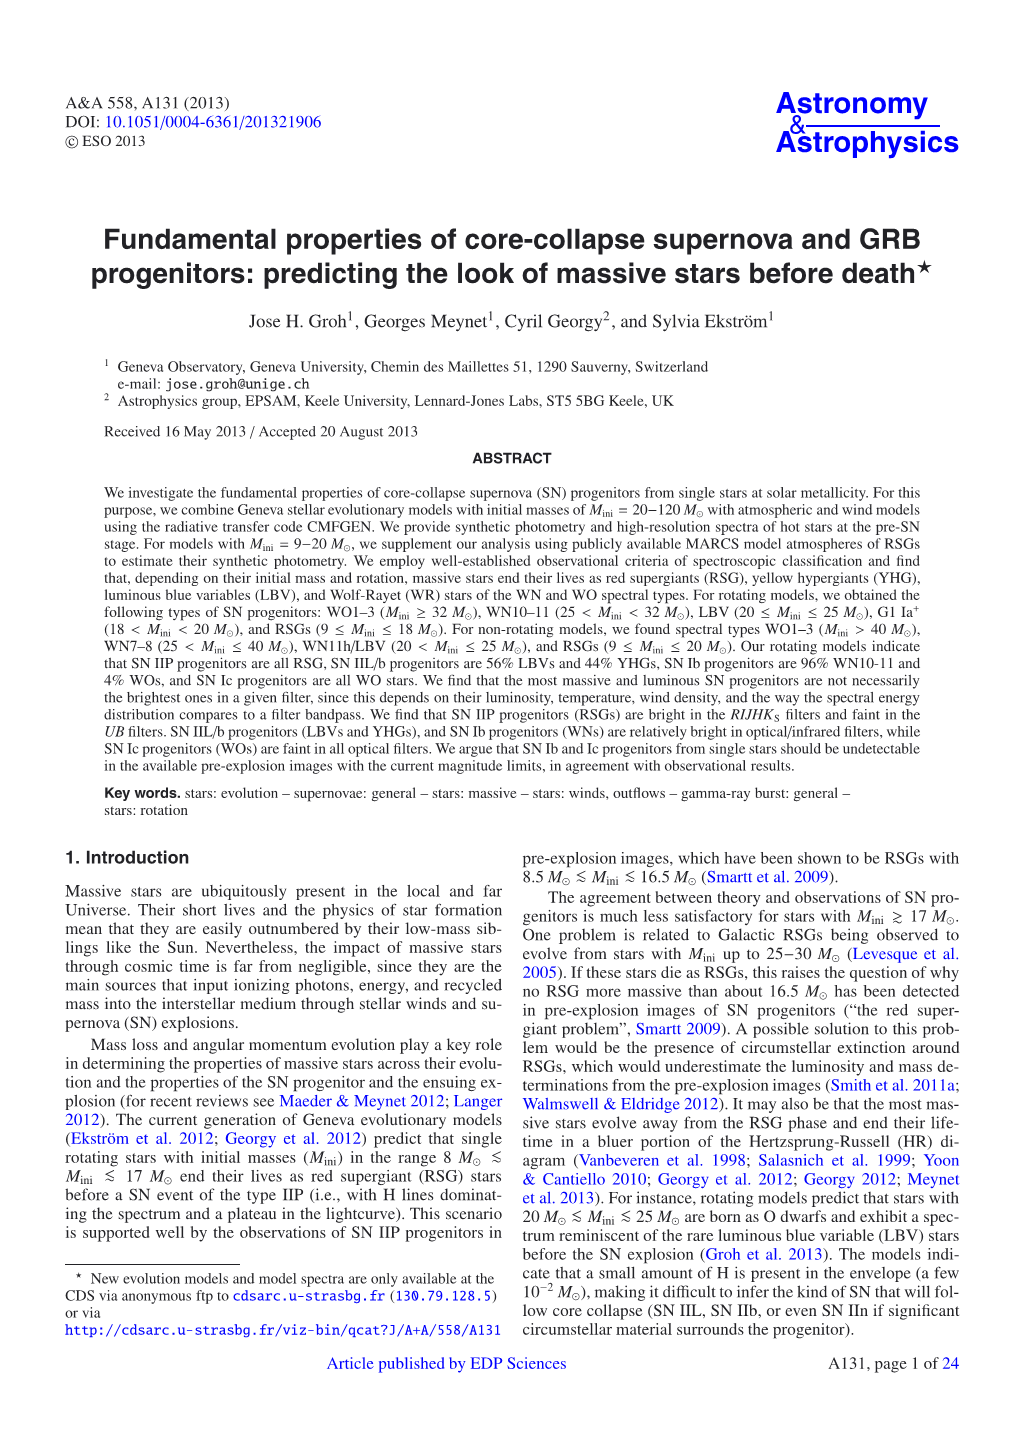 Fundamental Properties of Core-Collapse Supernova and GRB Progenitors: Predicting the Look of Massive Stars Before Death